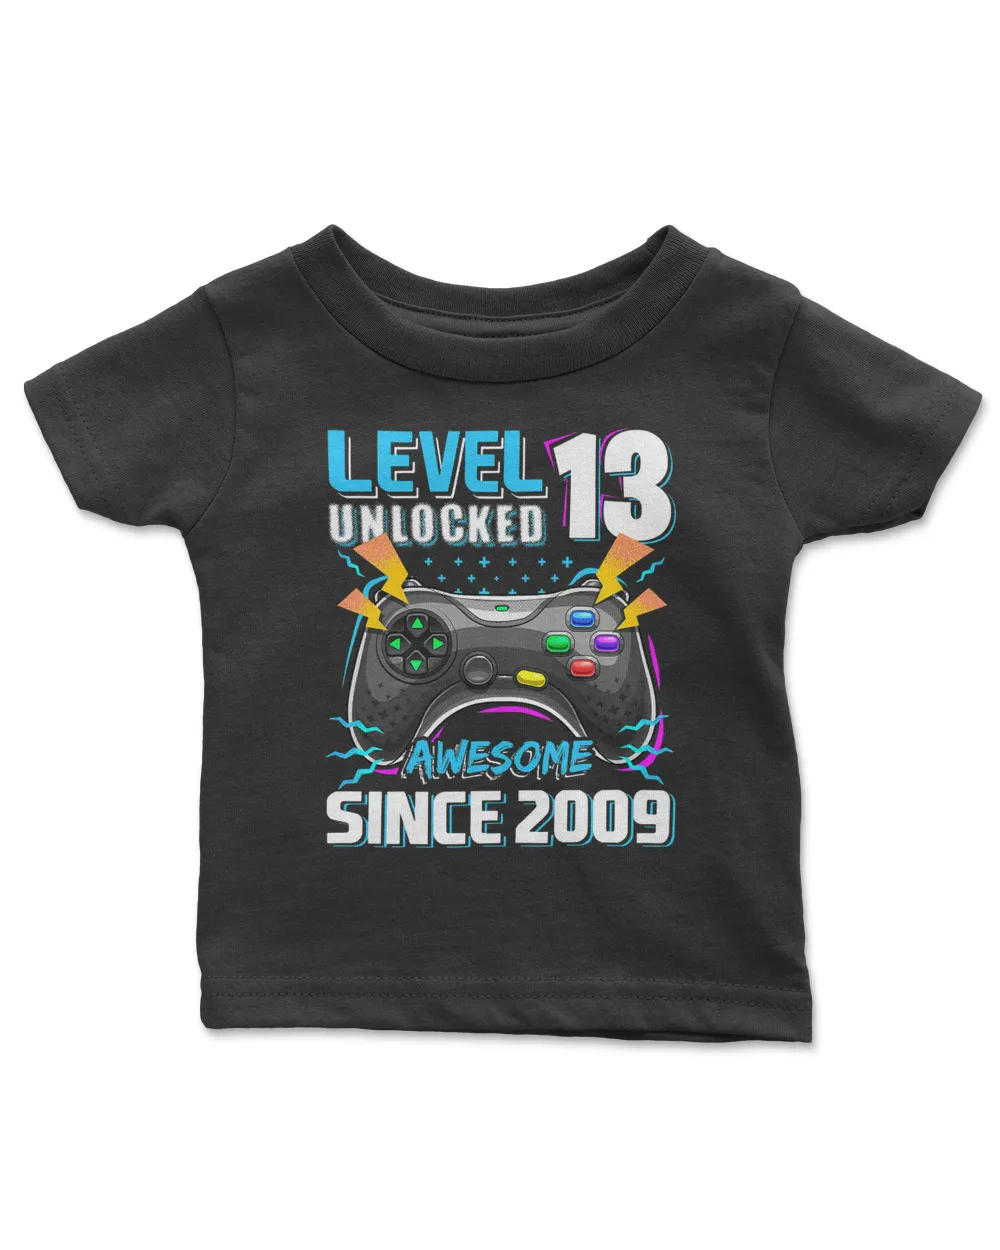 Level 13 Unlocked Awesome 2009 Video Game 13th Birthday Gamer